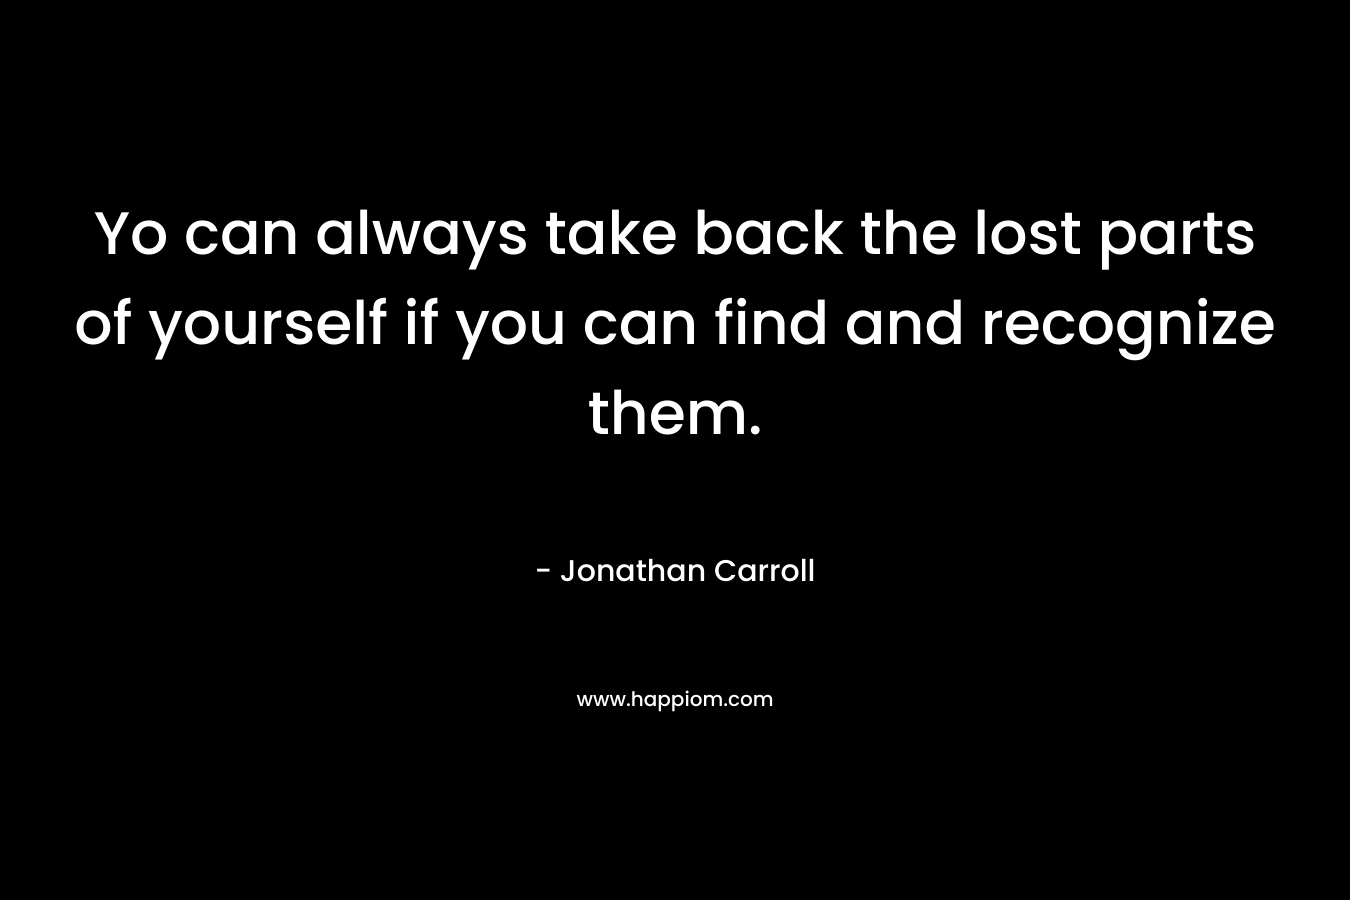 Yo can always take back the lost parts of yourself if you can find and recognize them. – Jonathan Carroll